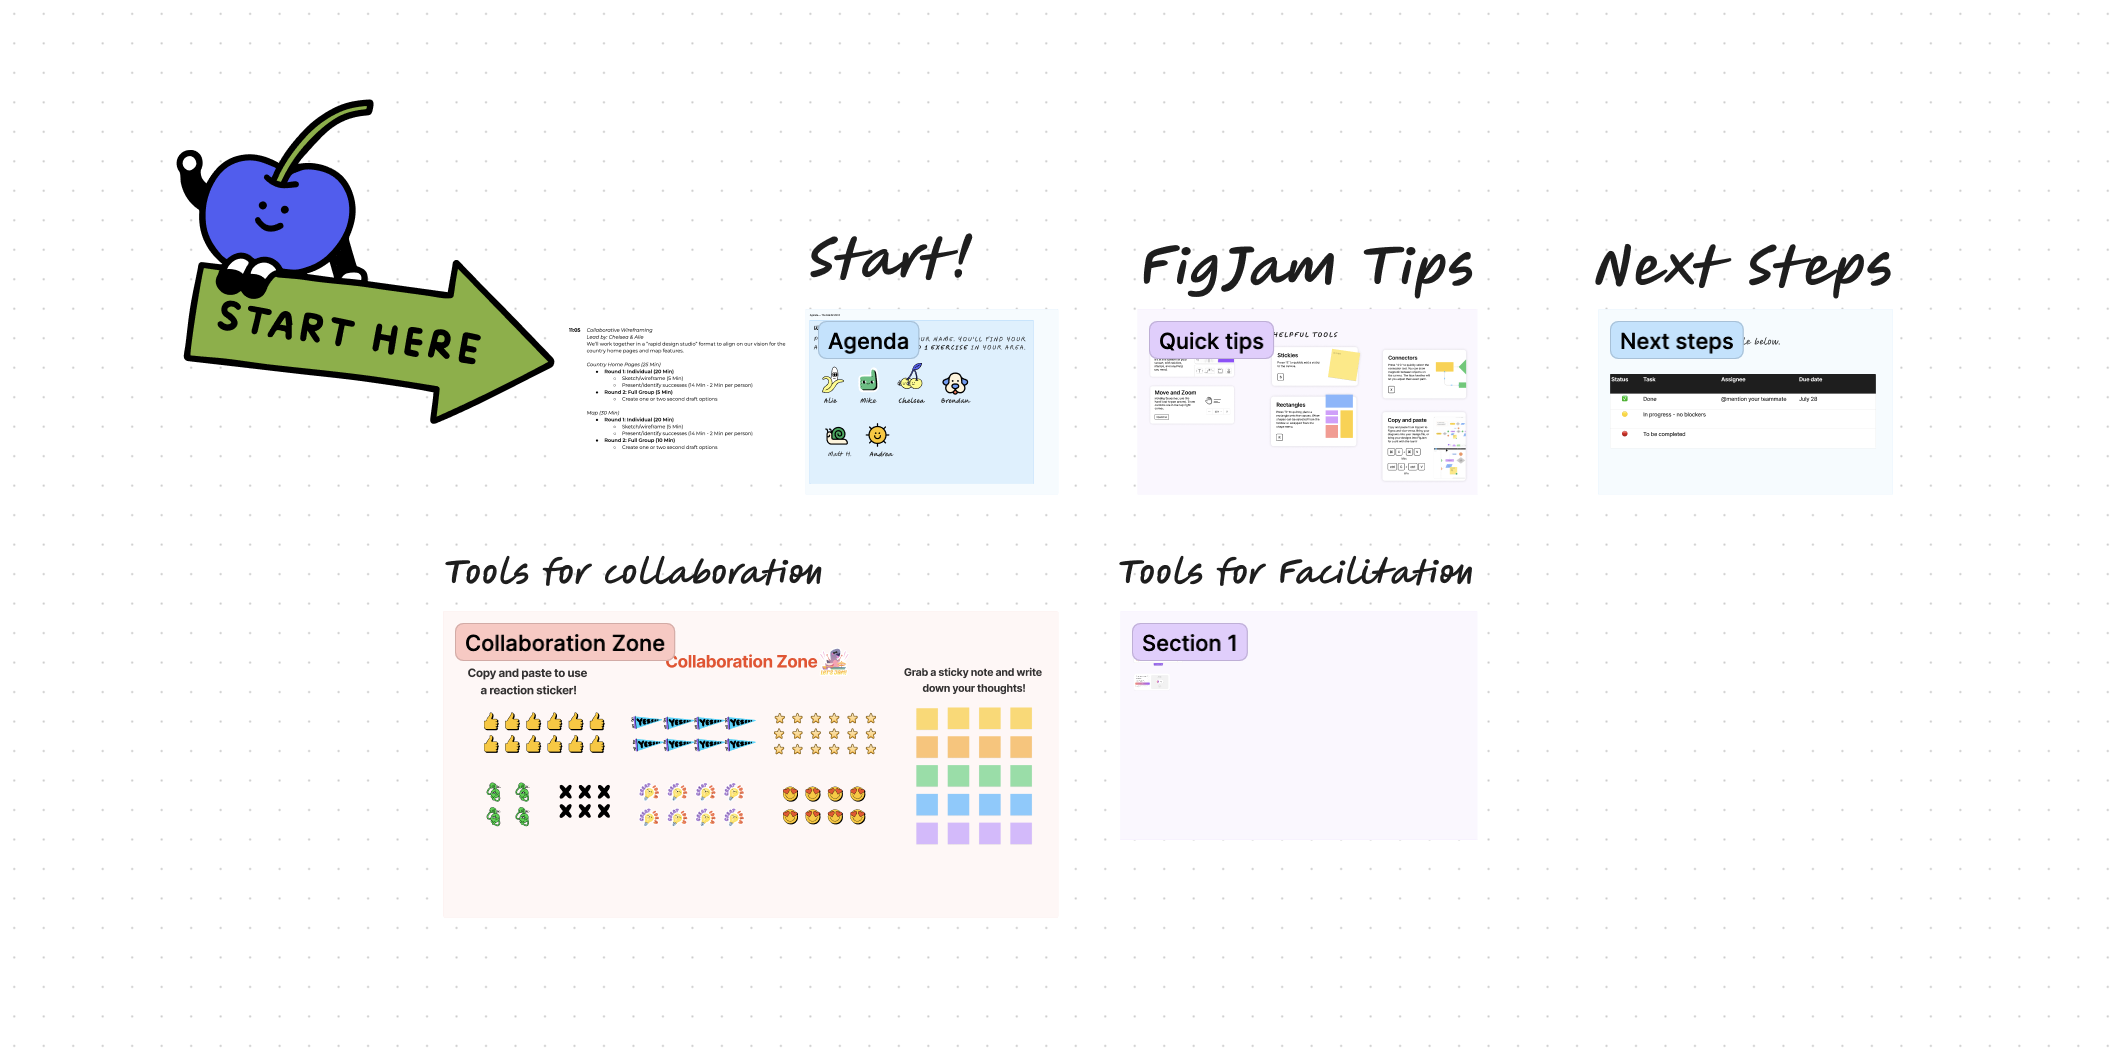 a FigJam board screenshot. It shows stickers and colorful boxes outlining where to start, and how to use the tool.